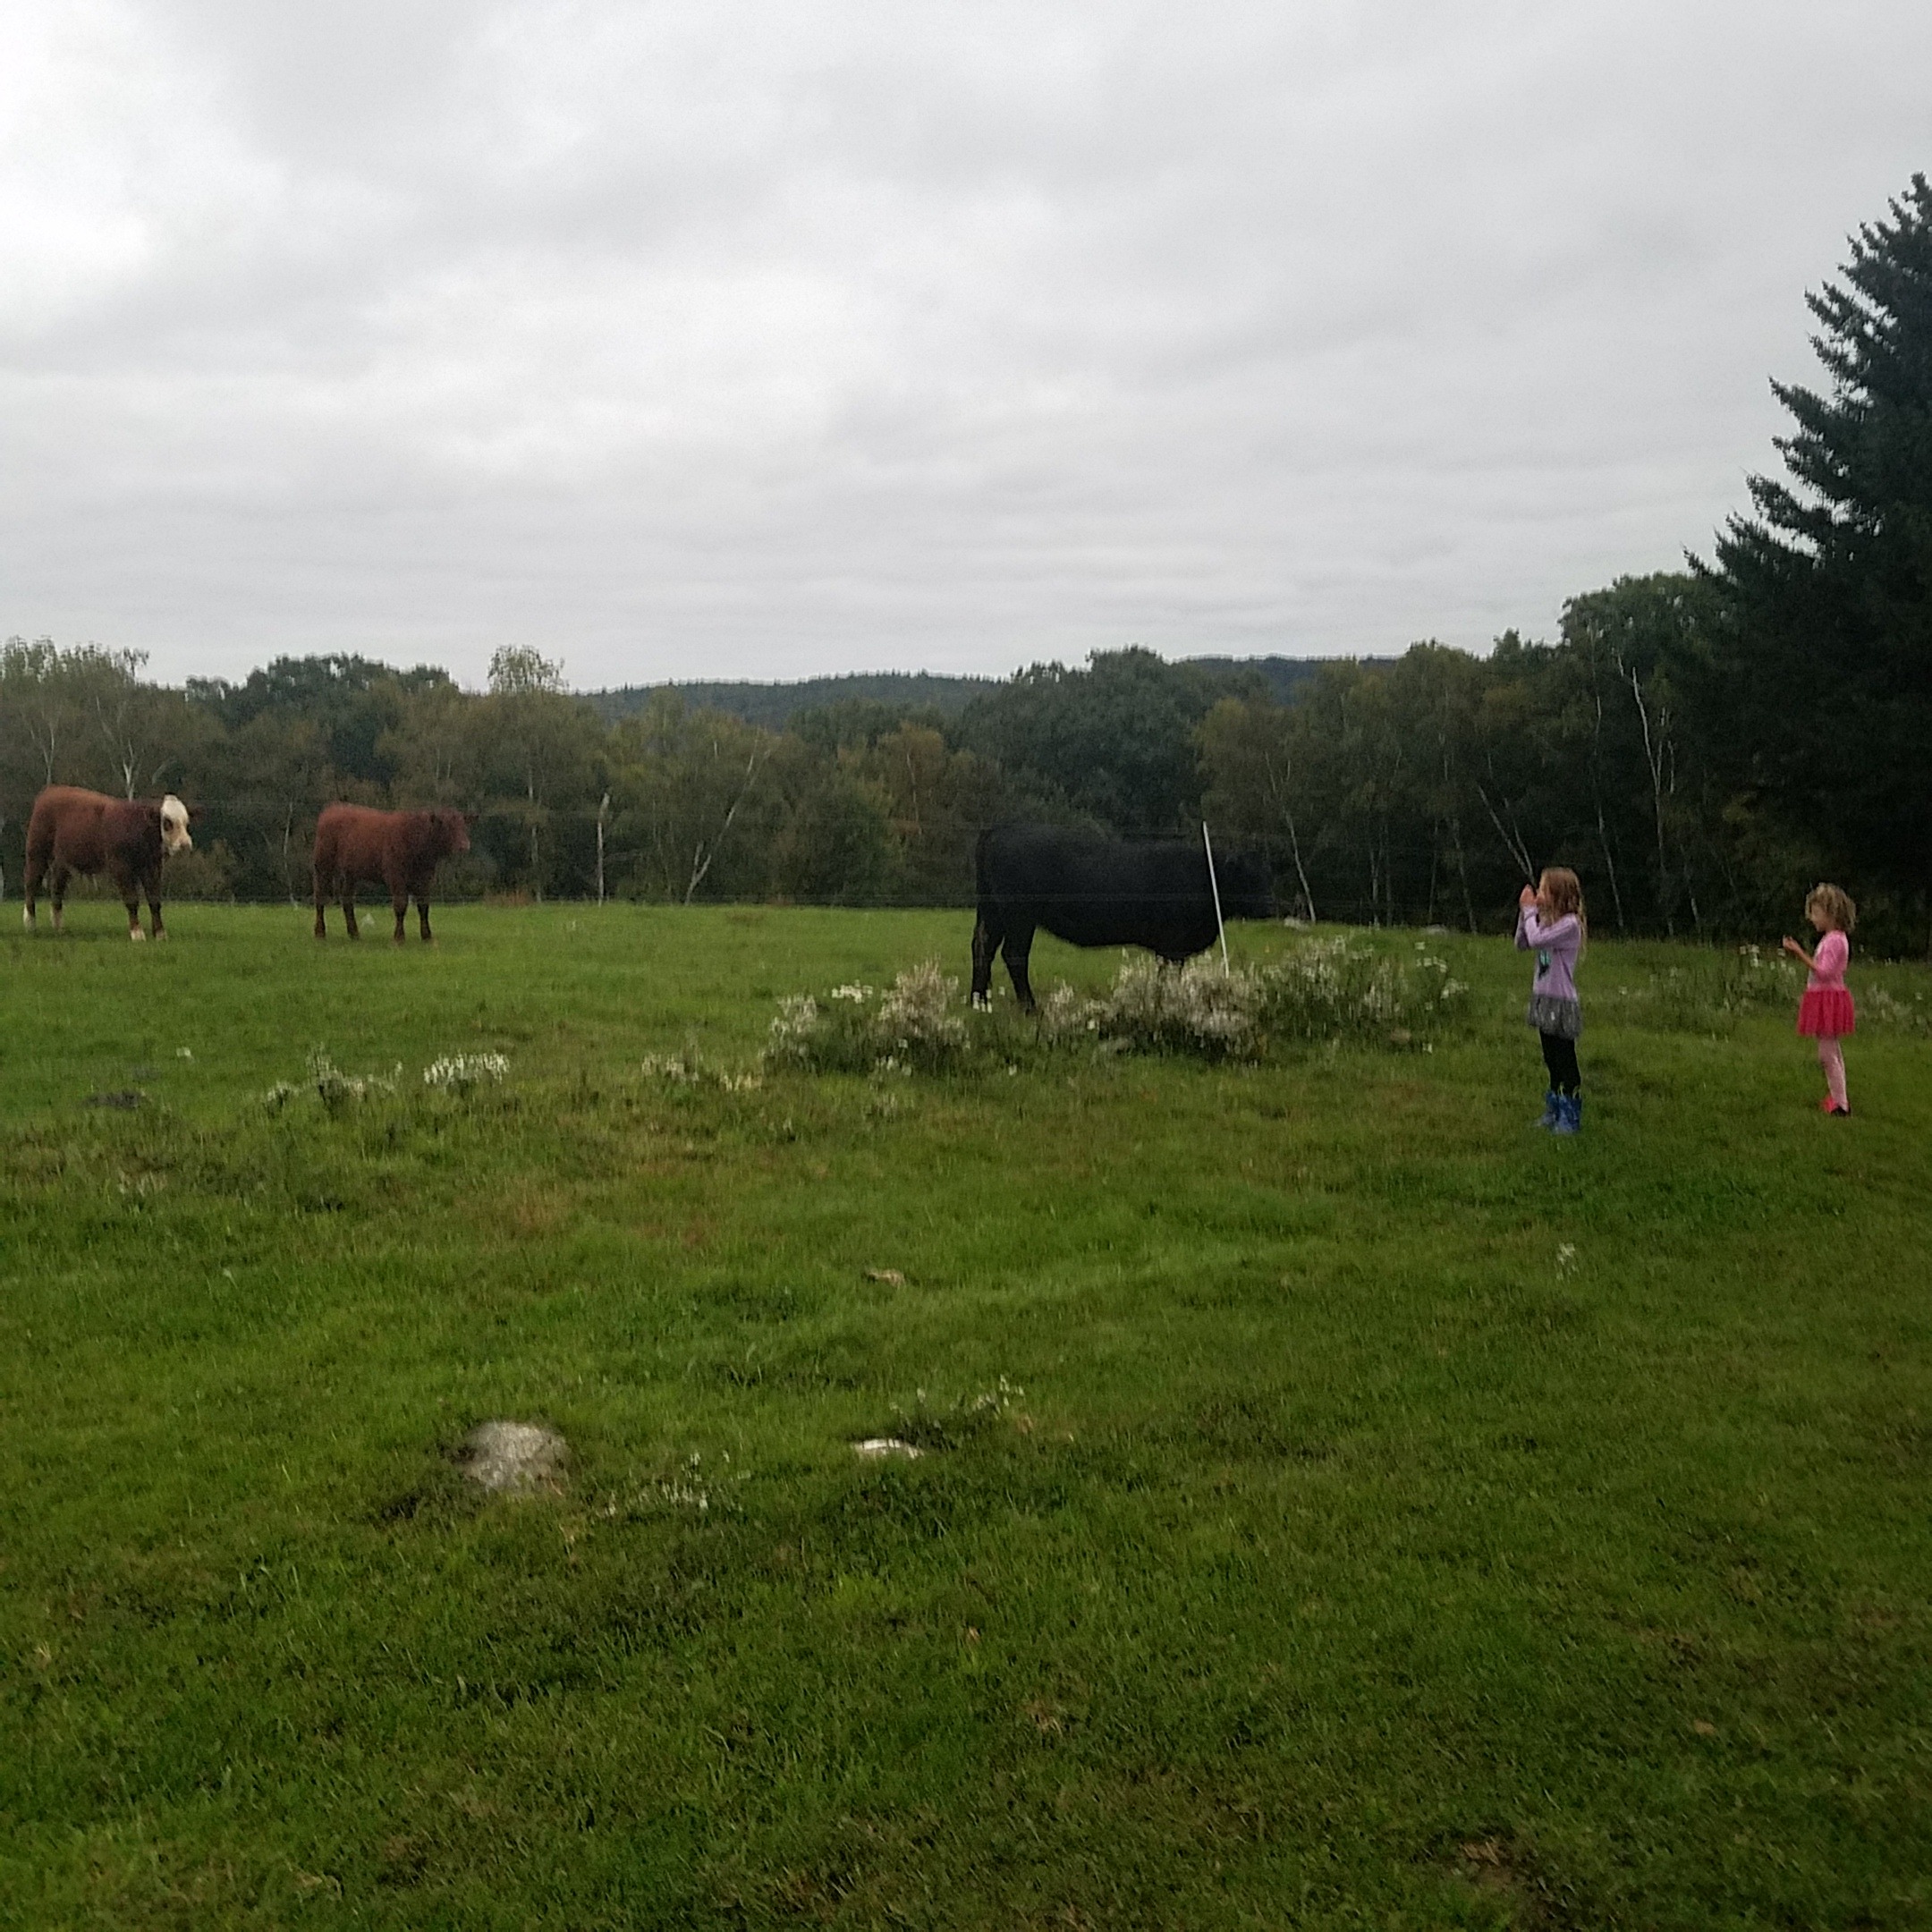 Children visiting the cows in the pasture at a working farm in Vermont